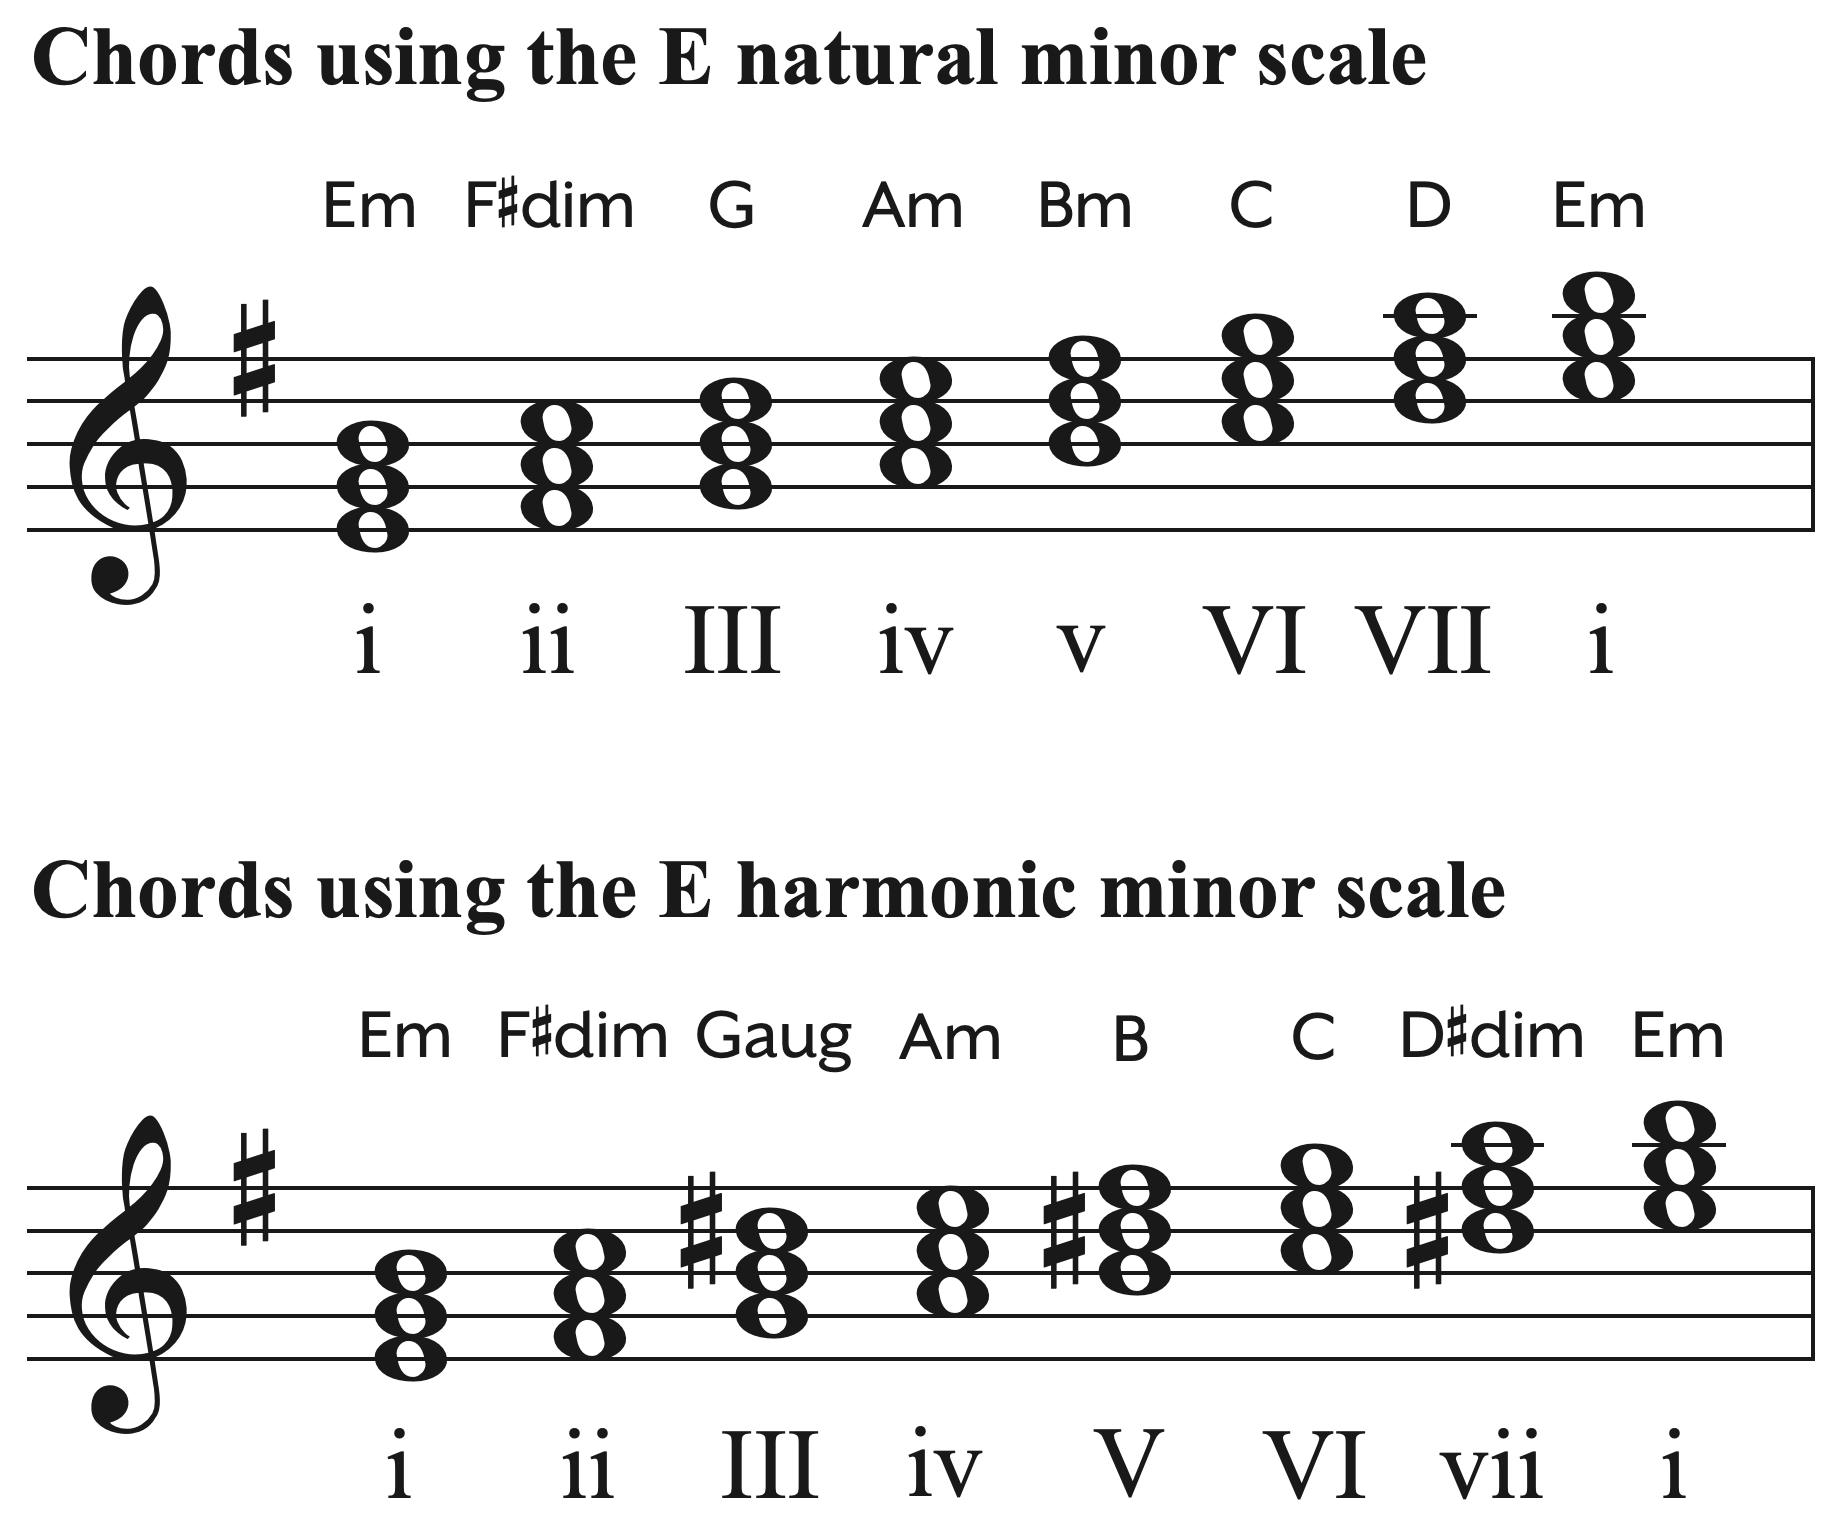 Chords using the E natural minor scale and chords using the E harmonic minor scale